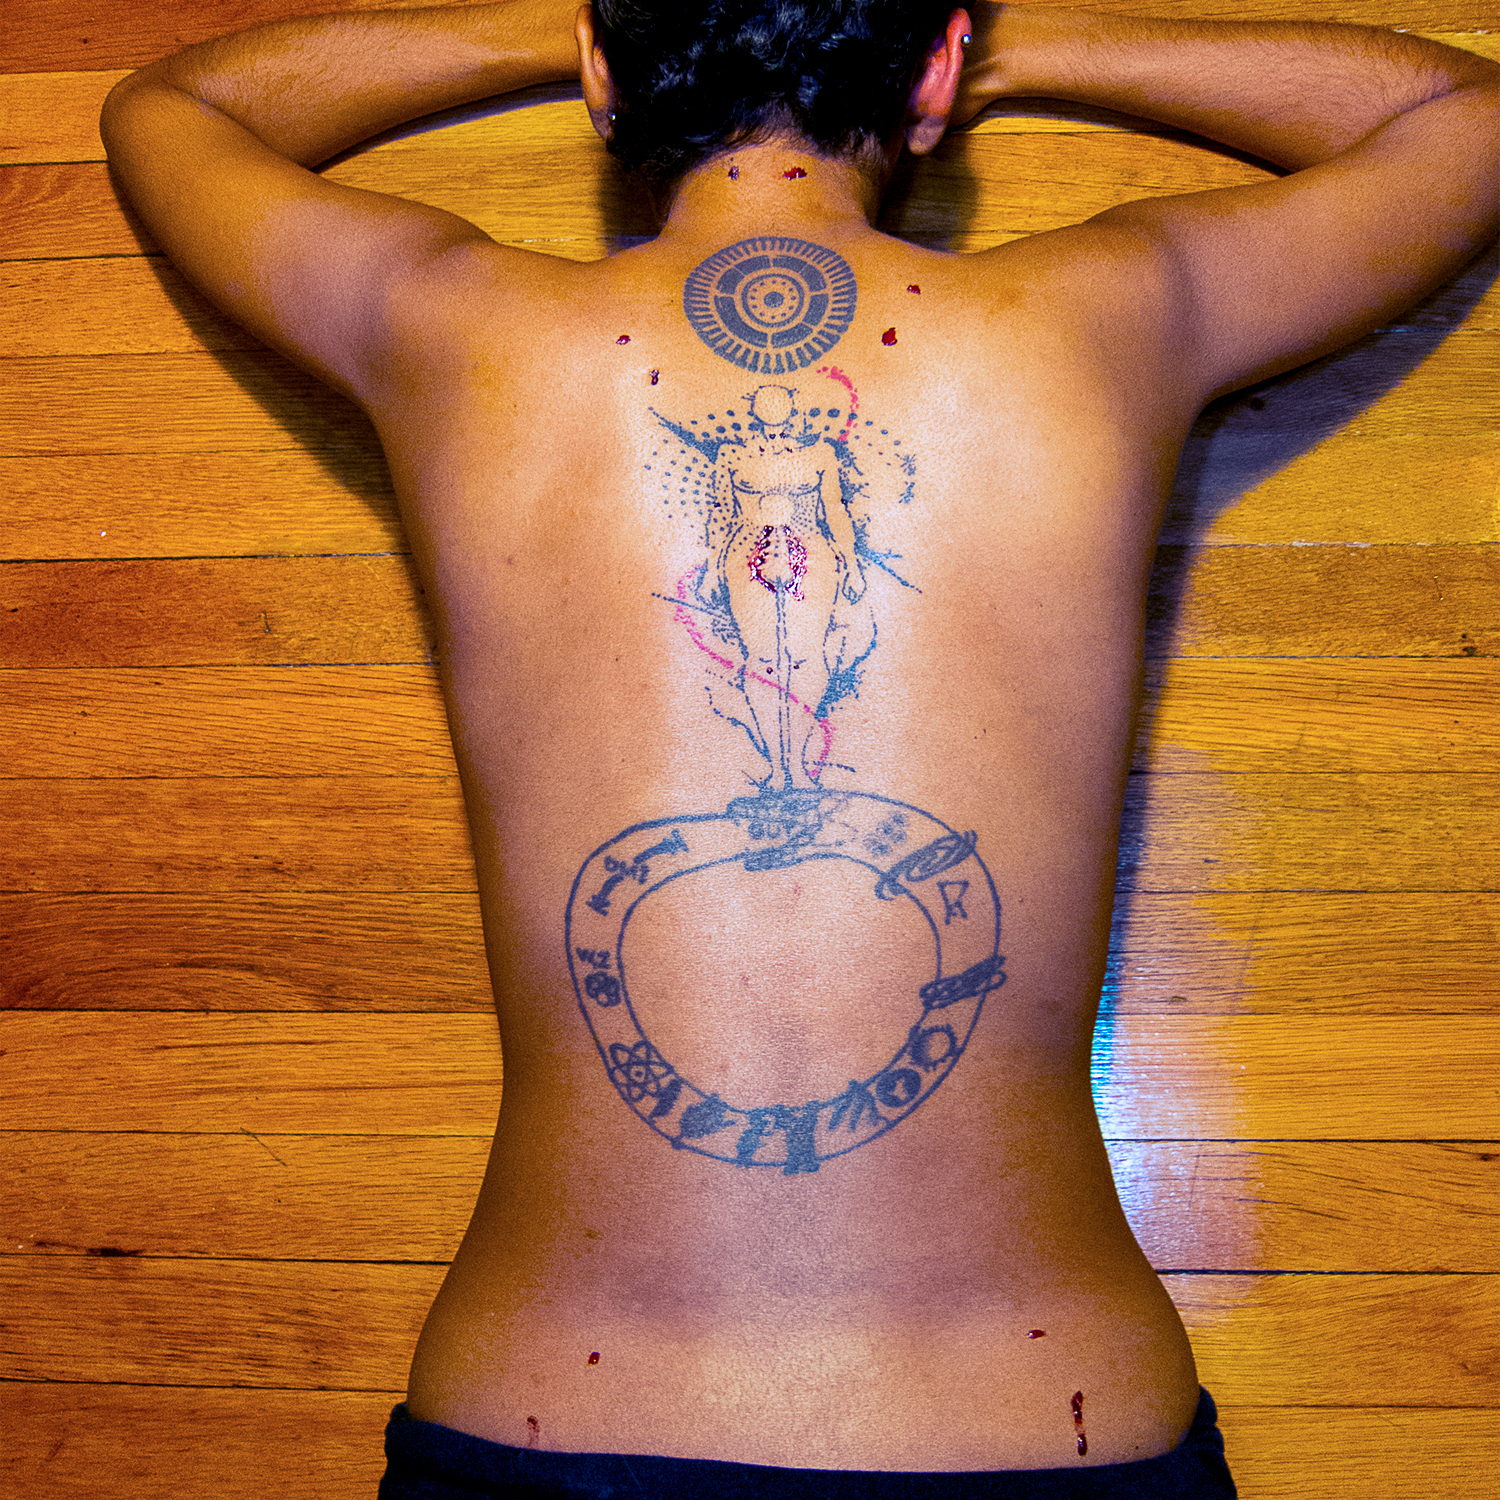 A Tamil woman's tattooed back, dotted with blood.